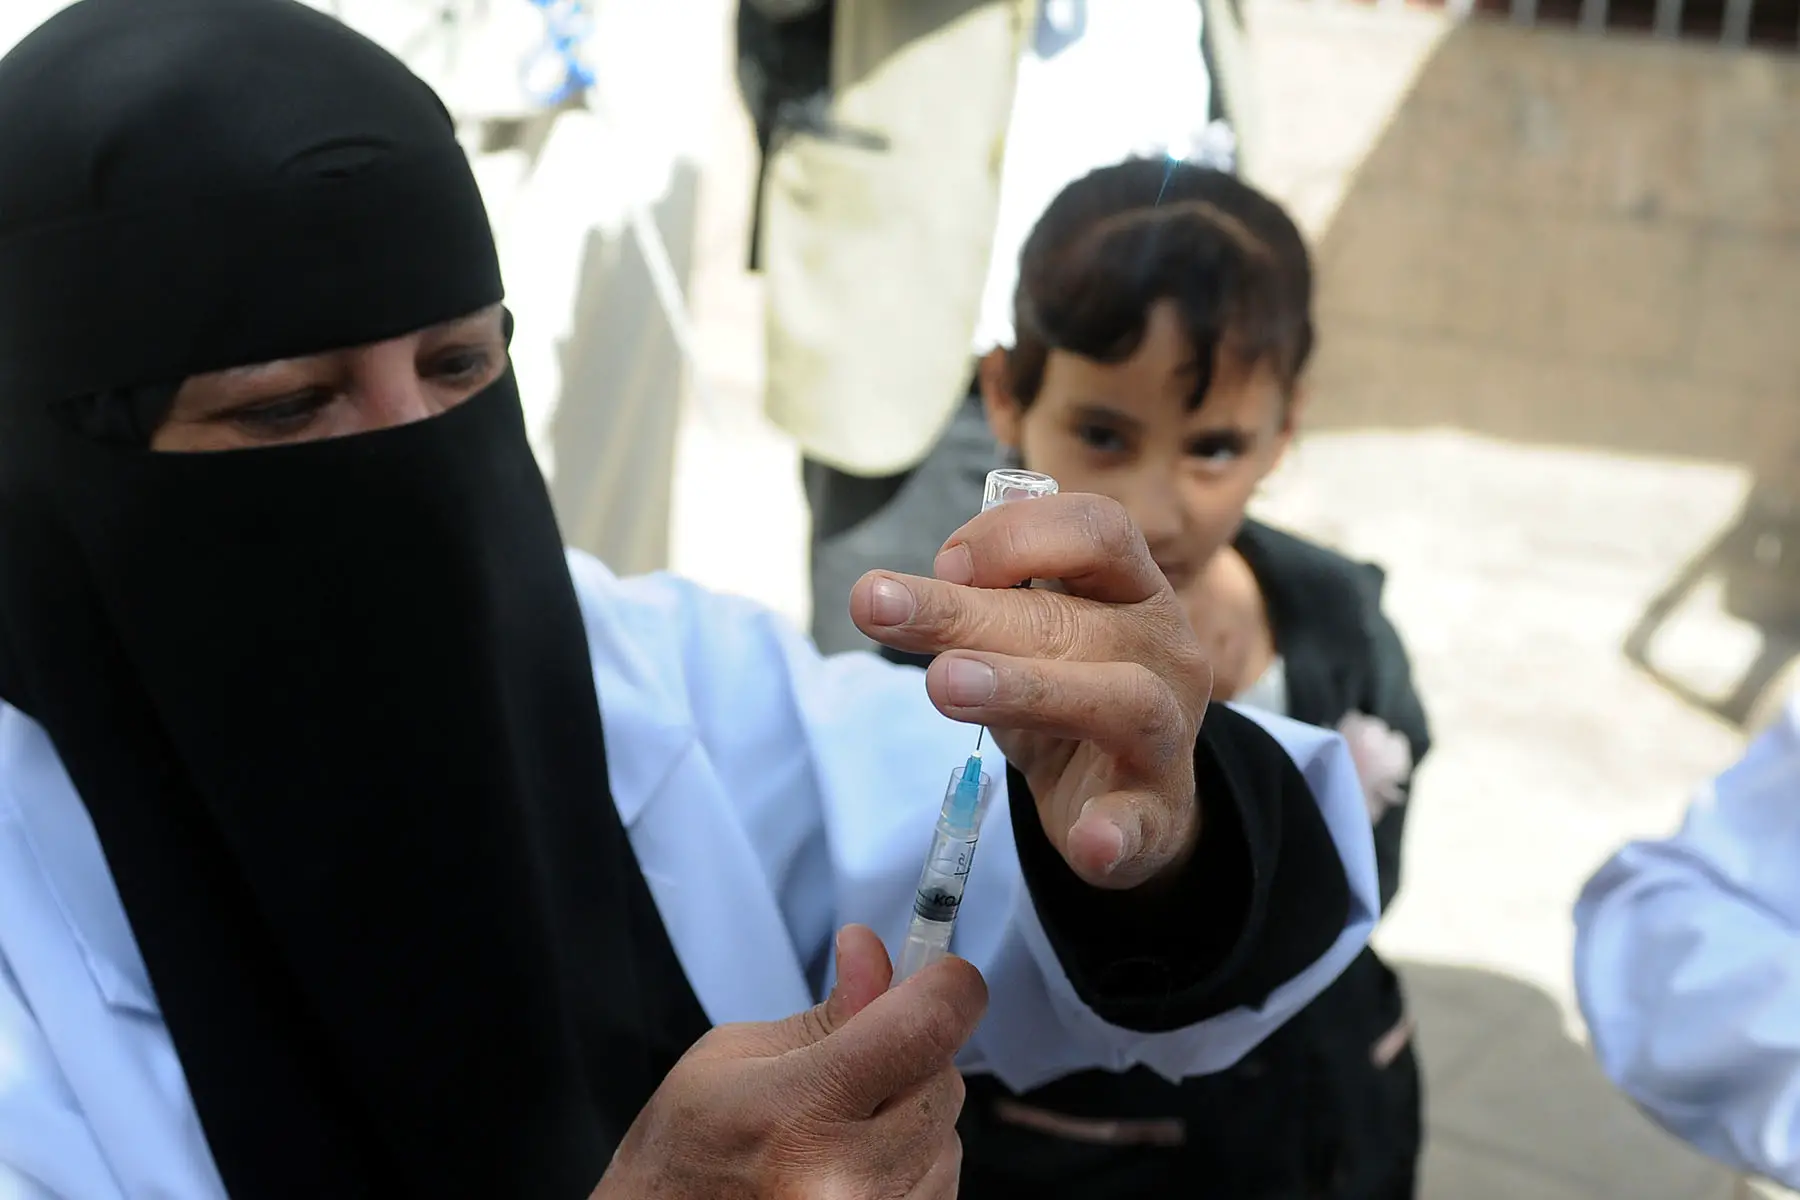 Nurse with a niqab readying a vaccine while a child in the background is looking on curiously.